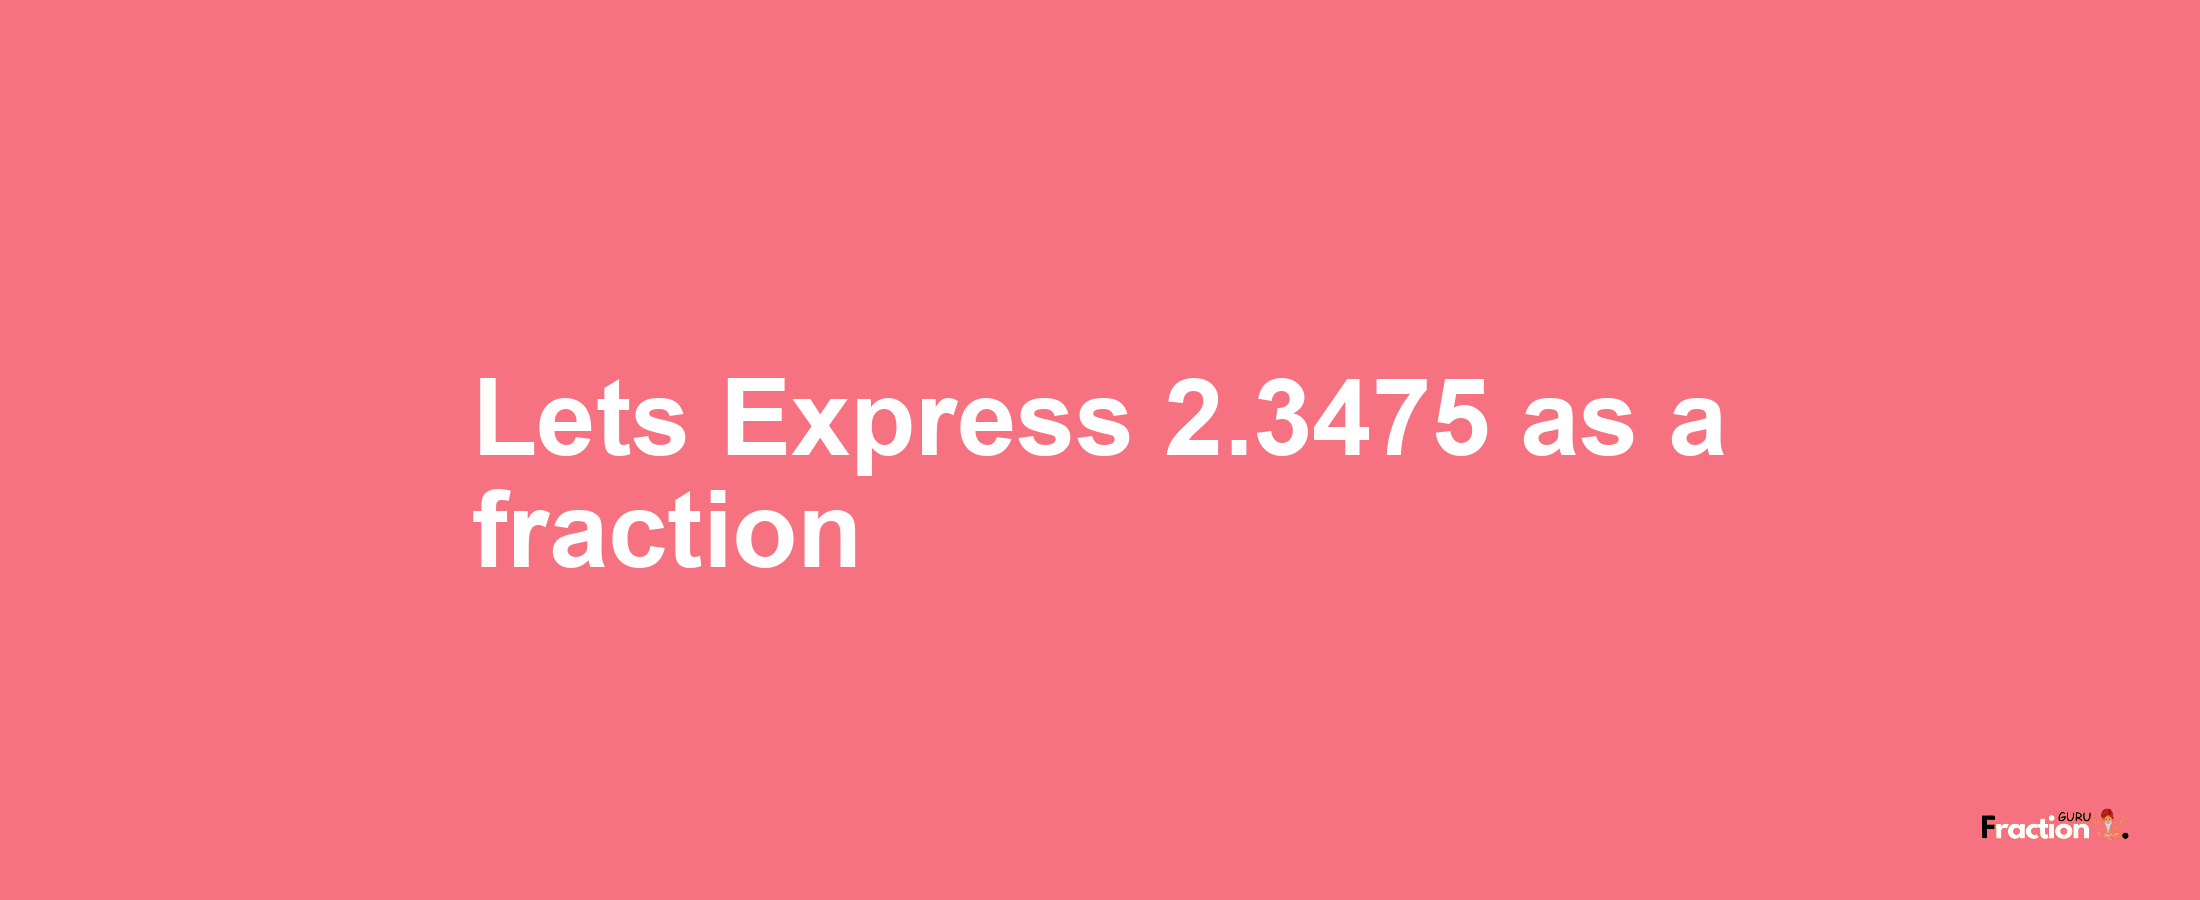 Lets Express 2.3475 as afraction